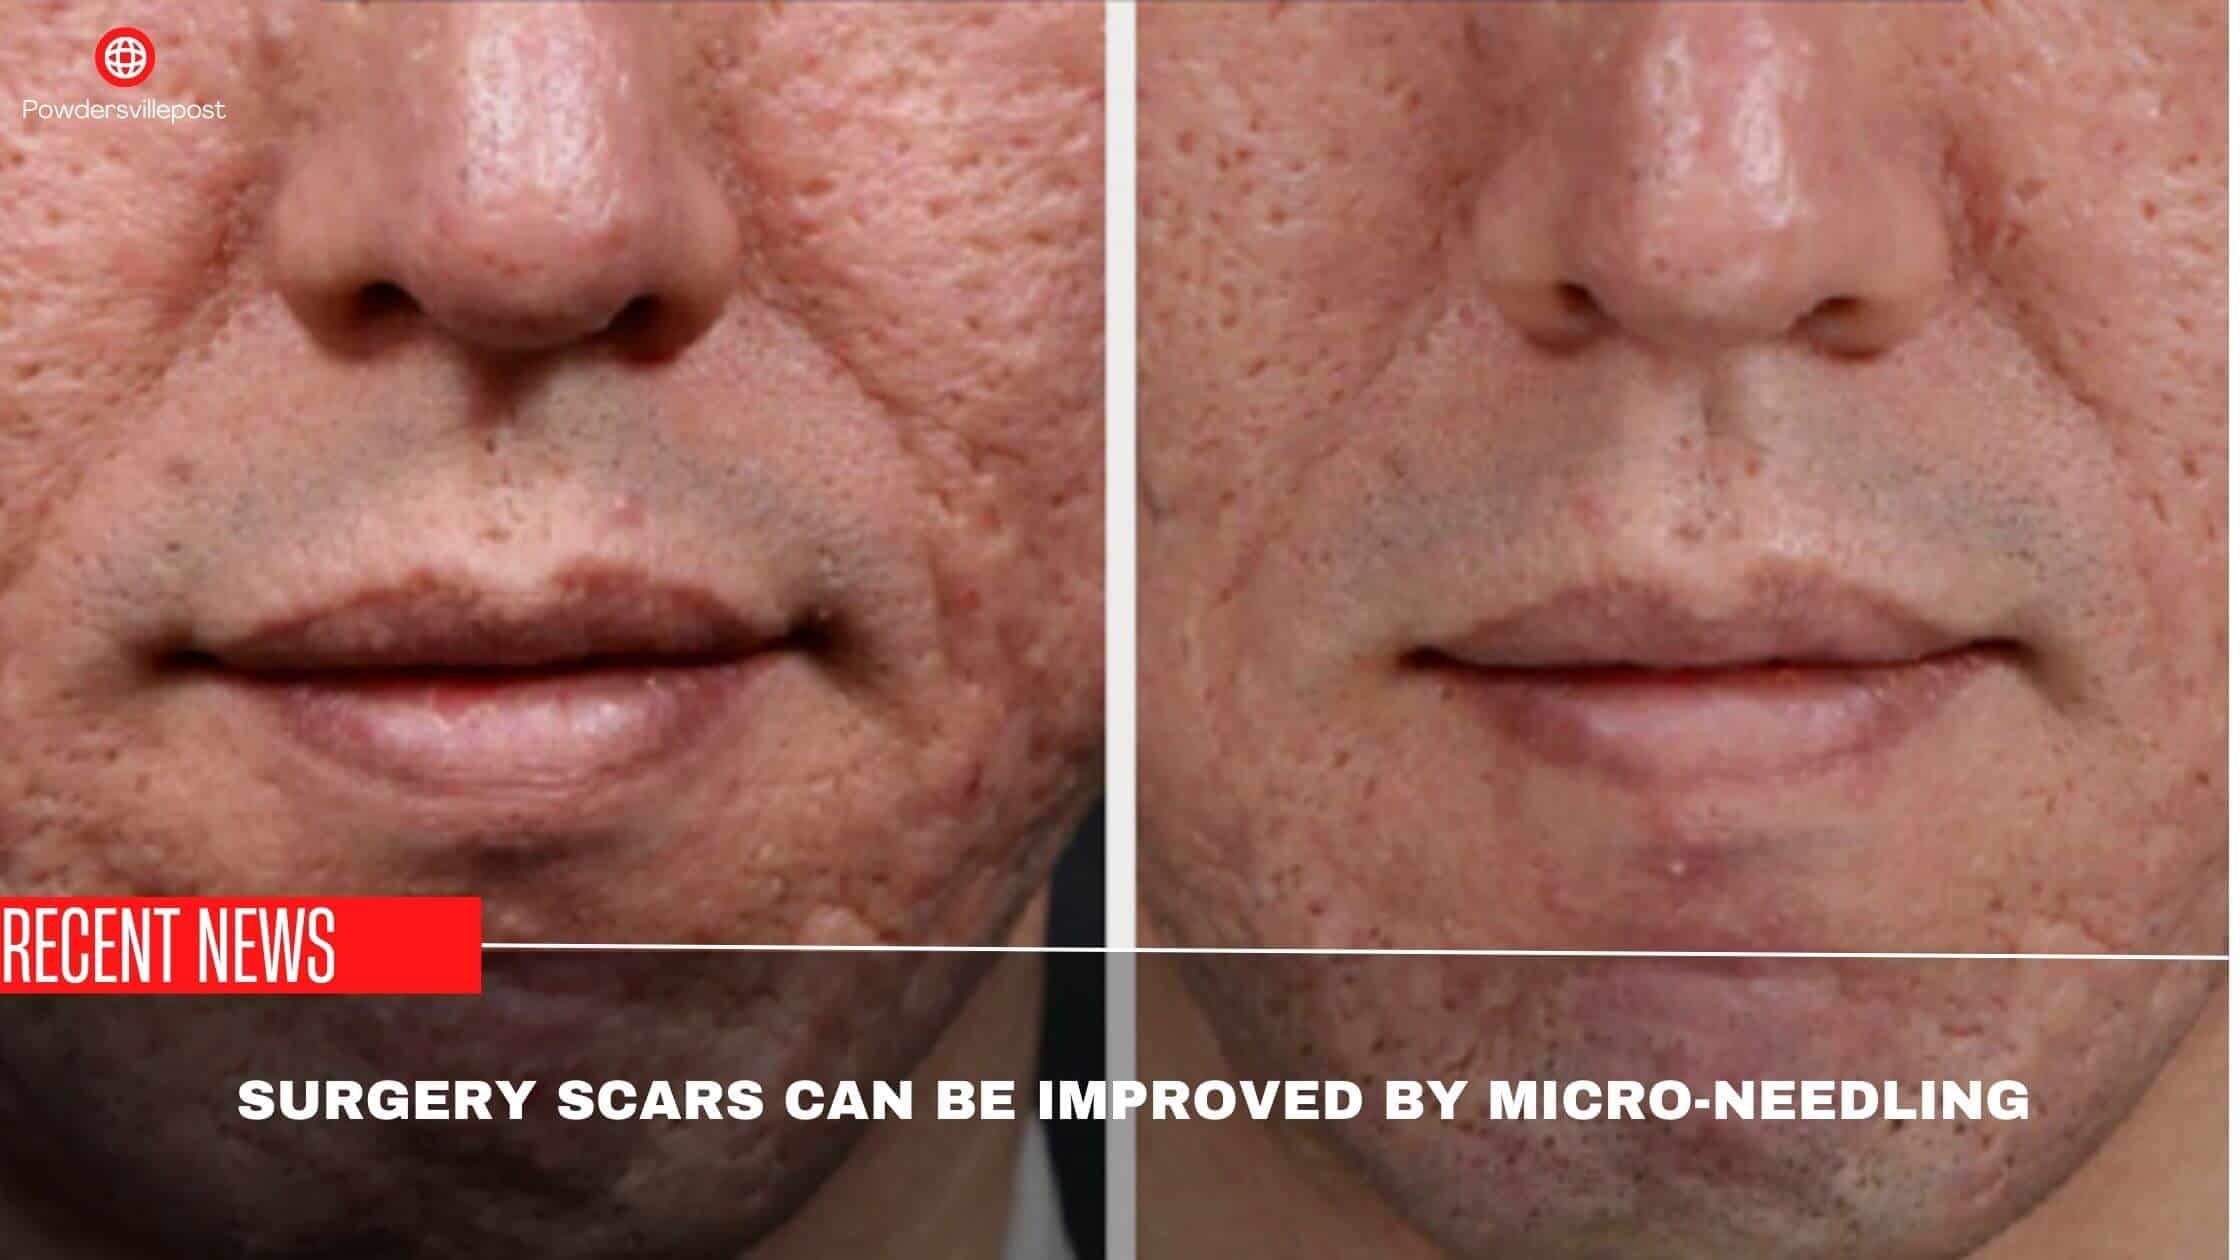 Surgery Scars Can Be Improved By Micro-Needling-Researchers Finding